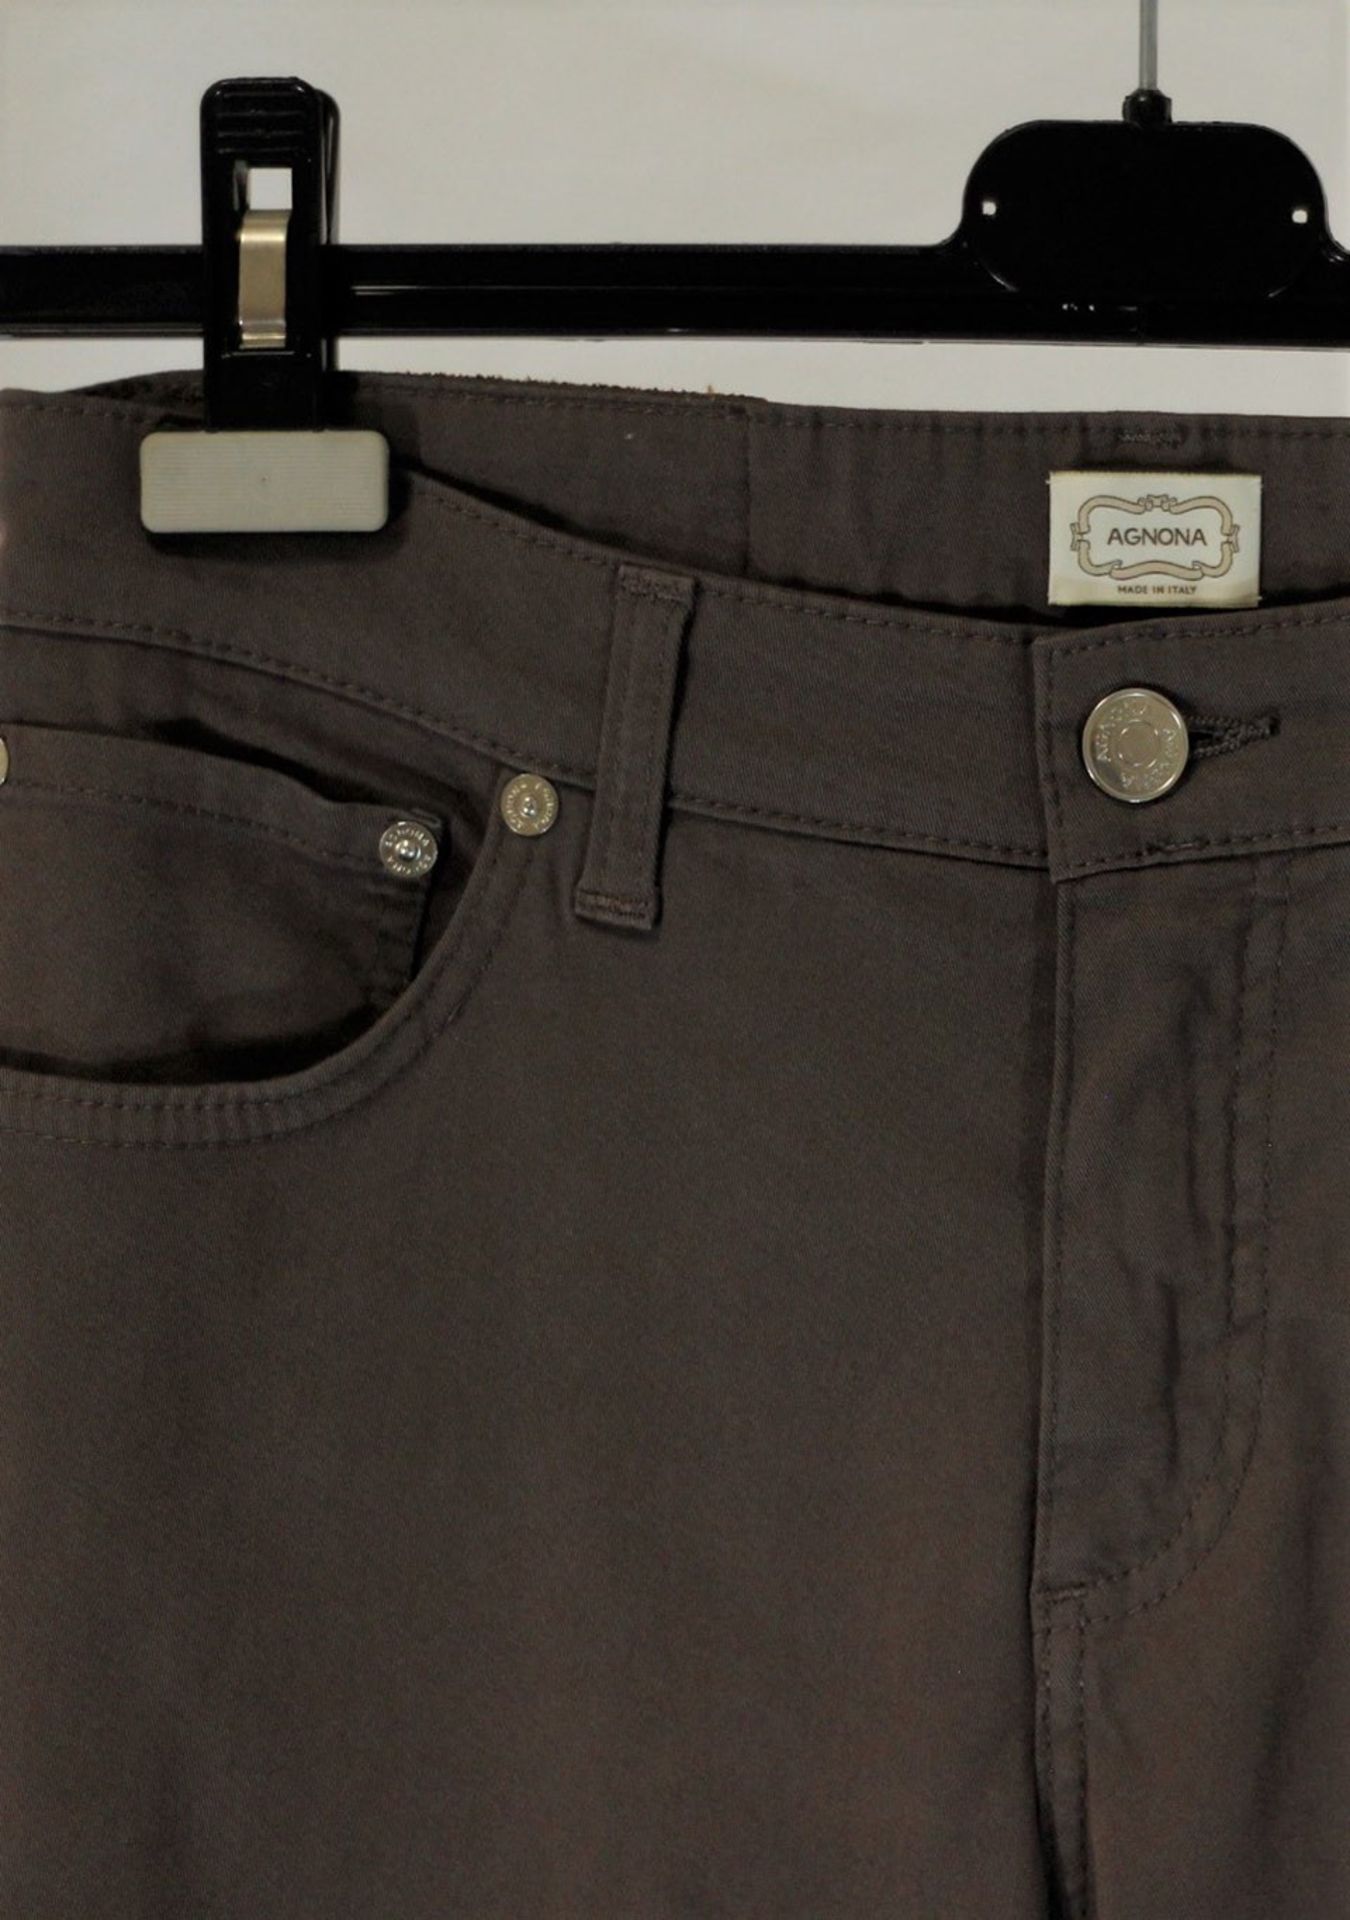 1 x Agnona Brown Jeans - Size: 12 - Material: 98% Cotton, 2% Elastane. Lining 100% Cotton - From a - Image 2 of 6